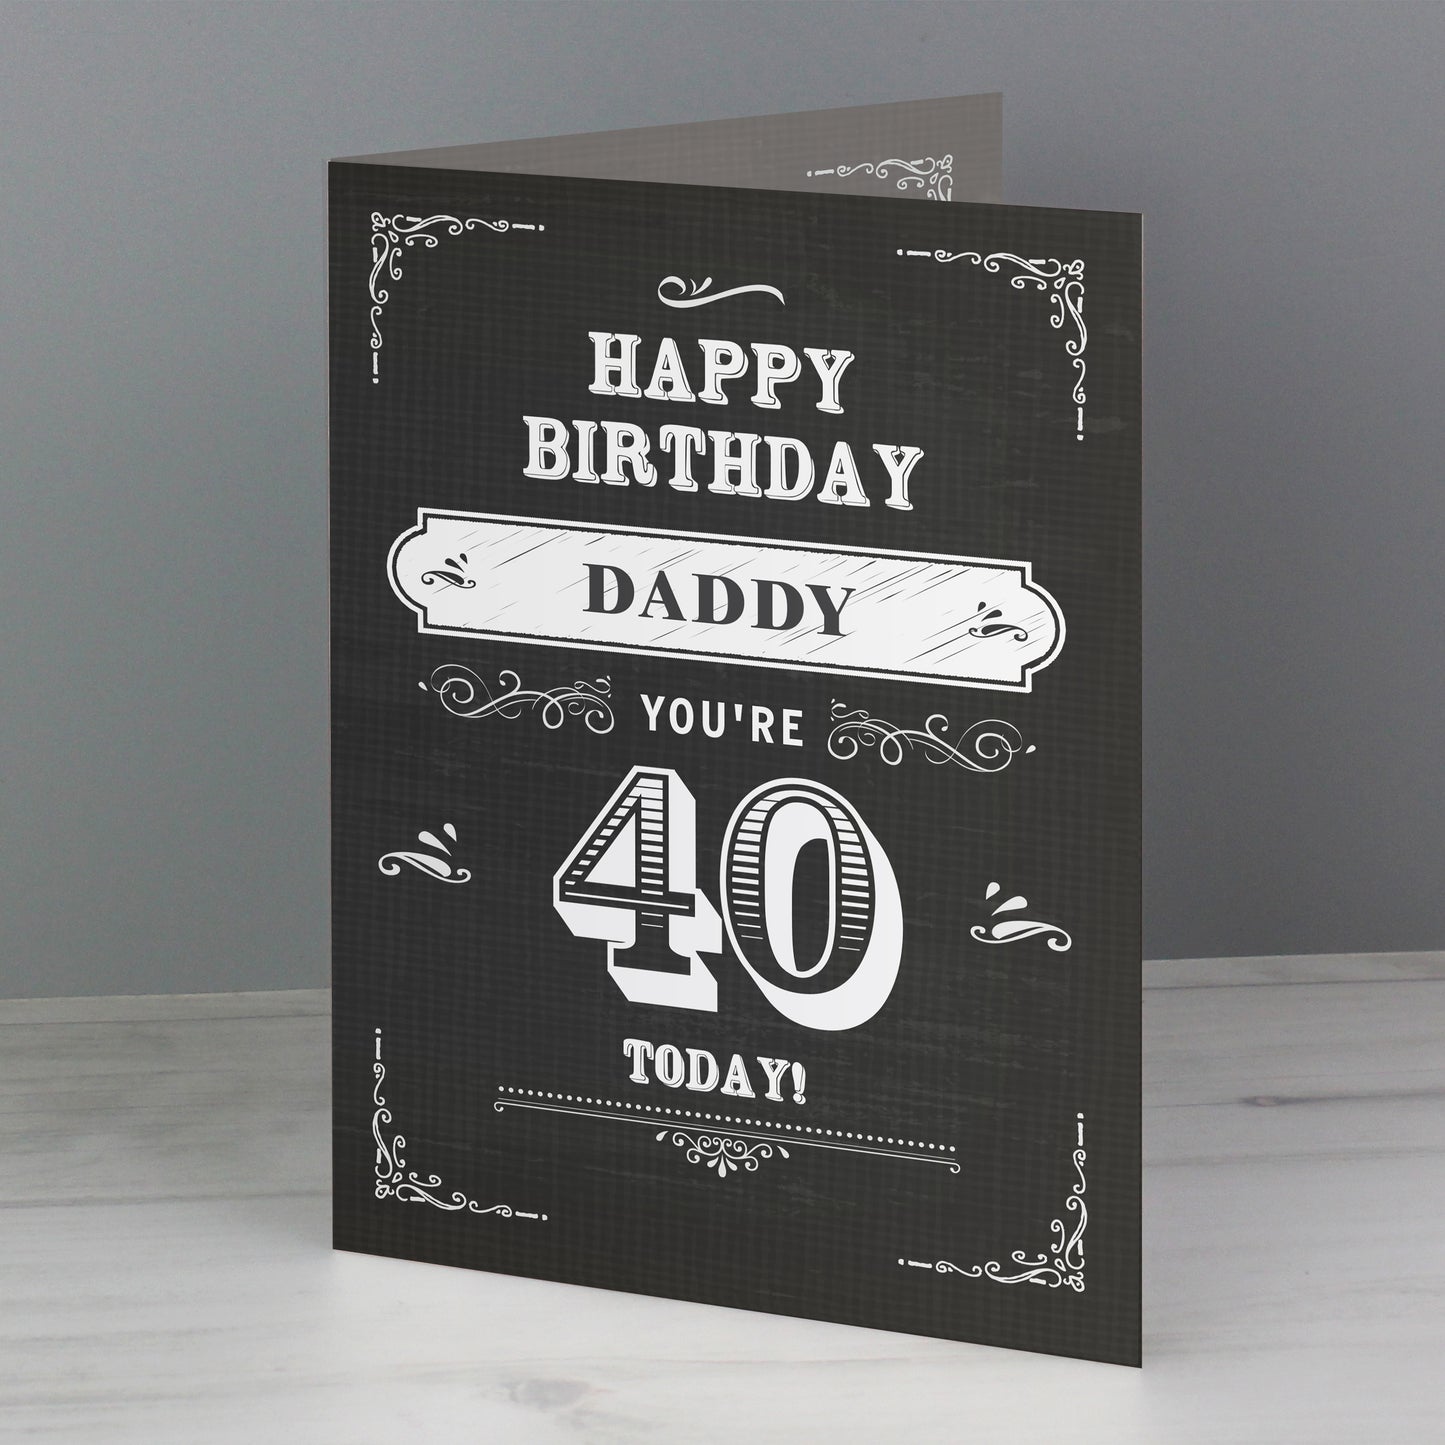 Personalised Vintage Typography Birthday Card Add Any Age & Name - Personalise It!